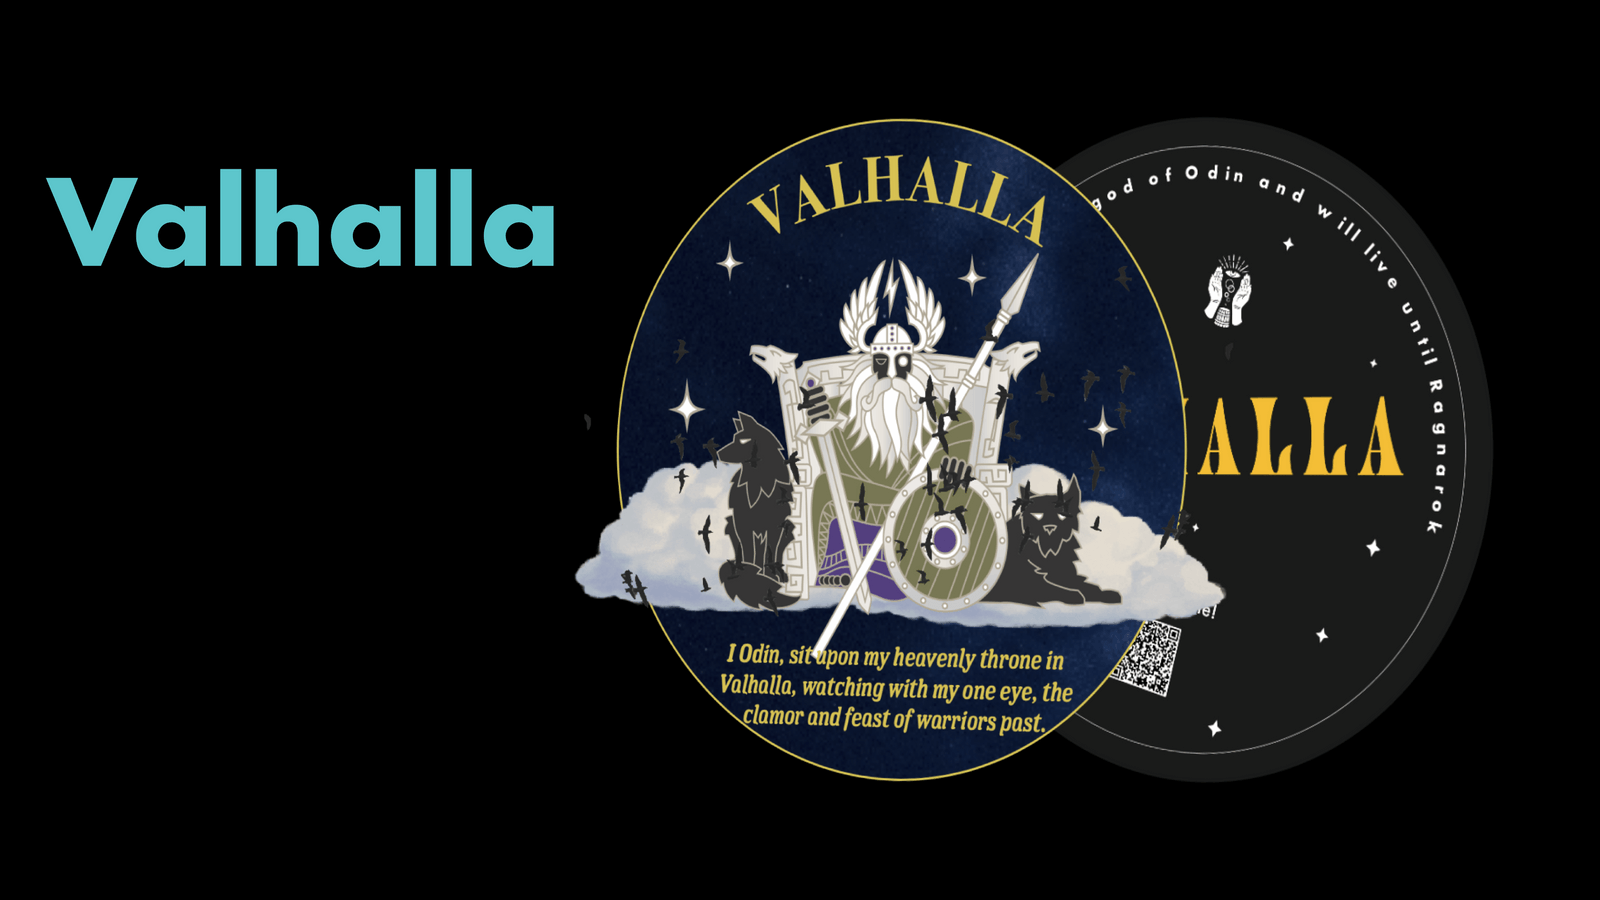 An example of what the lens would look like with the Valhalla beer